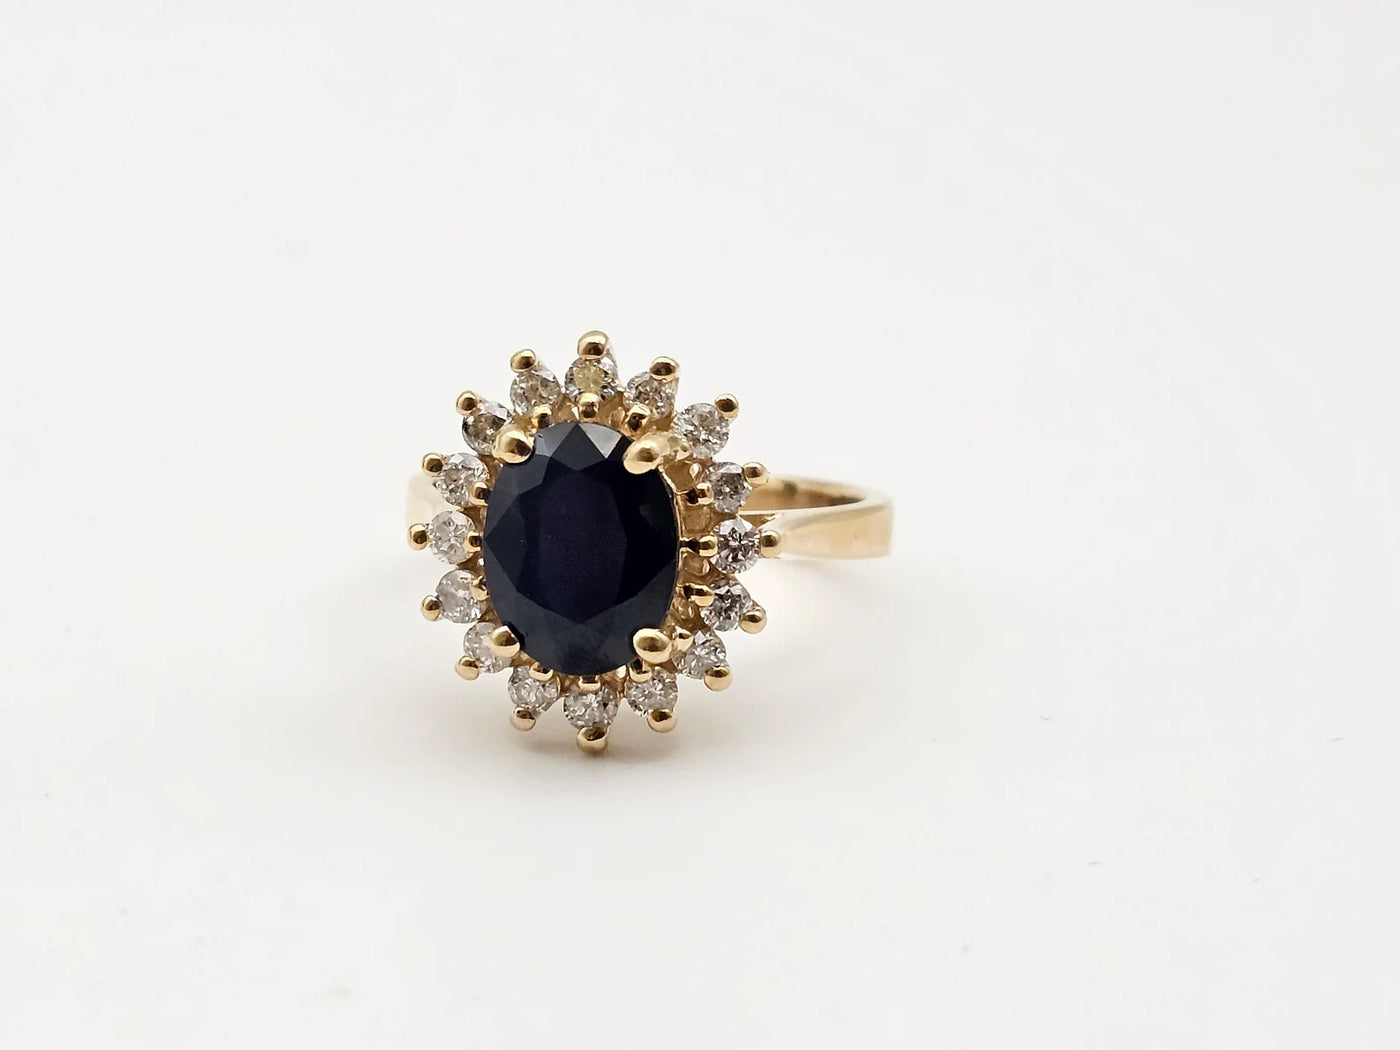 Natural blue sapphire, 8 carat, silver ring, yellow gold coating, Grade one